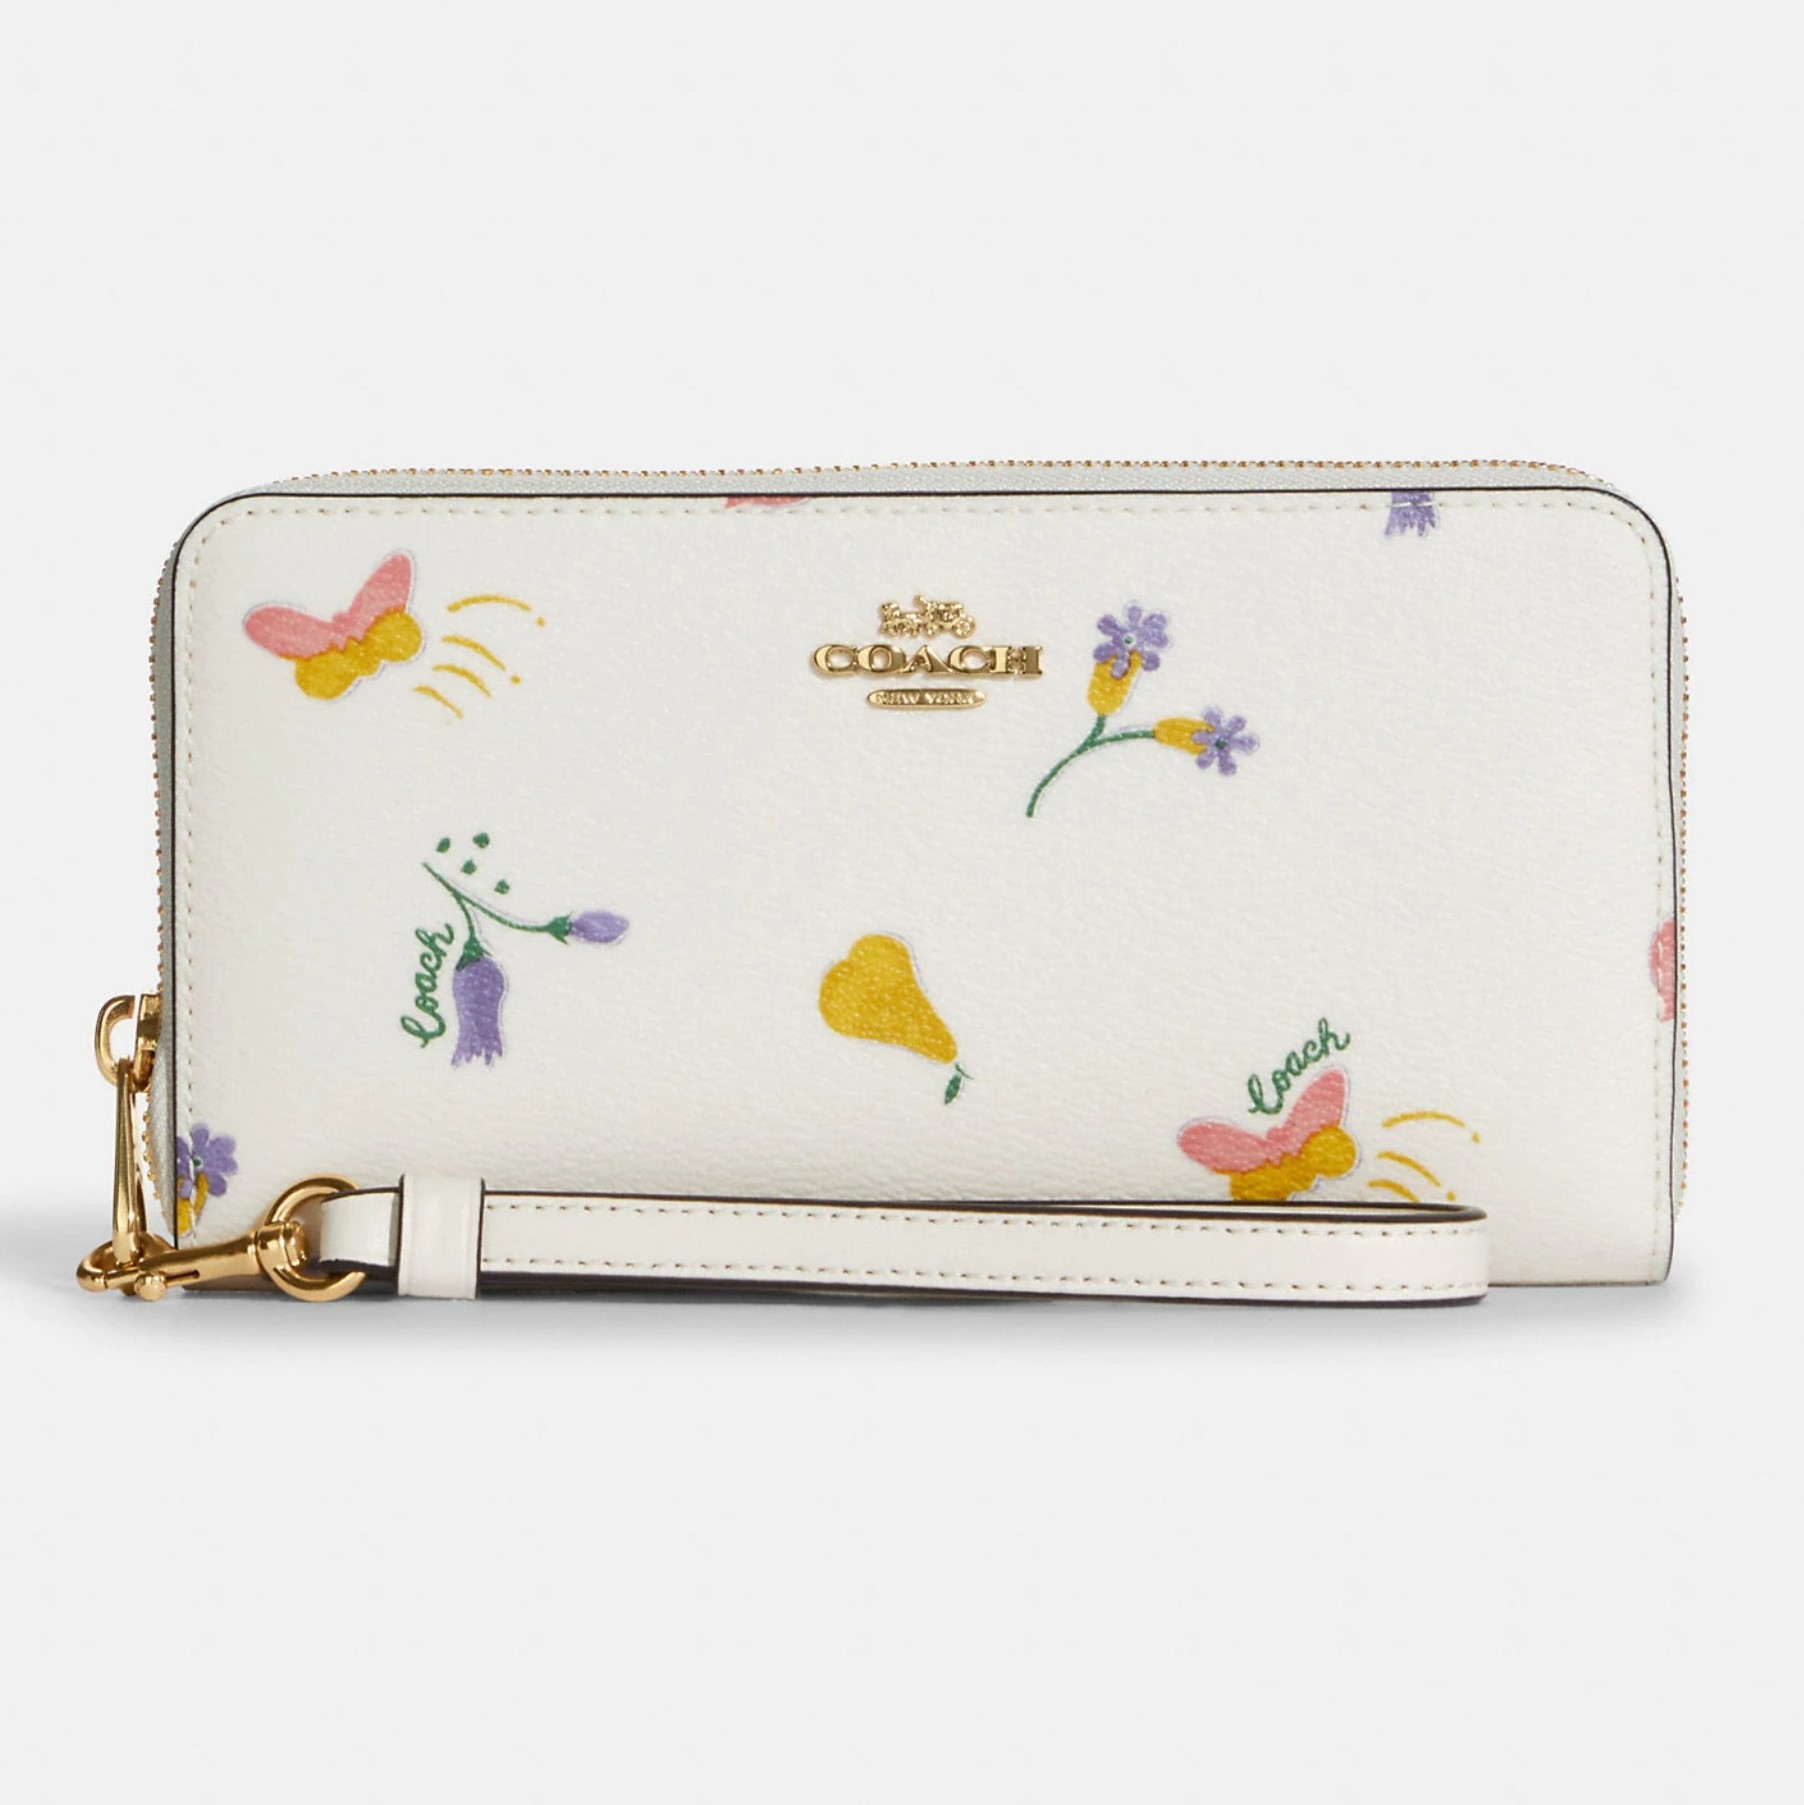 VÍ COACH LONG ZIP AROUND WALLET WITH DREAMY VEGGIE PRINT 3